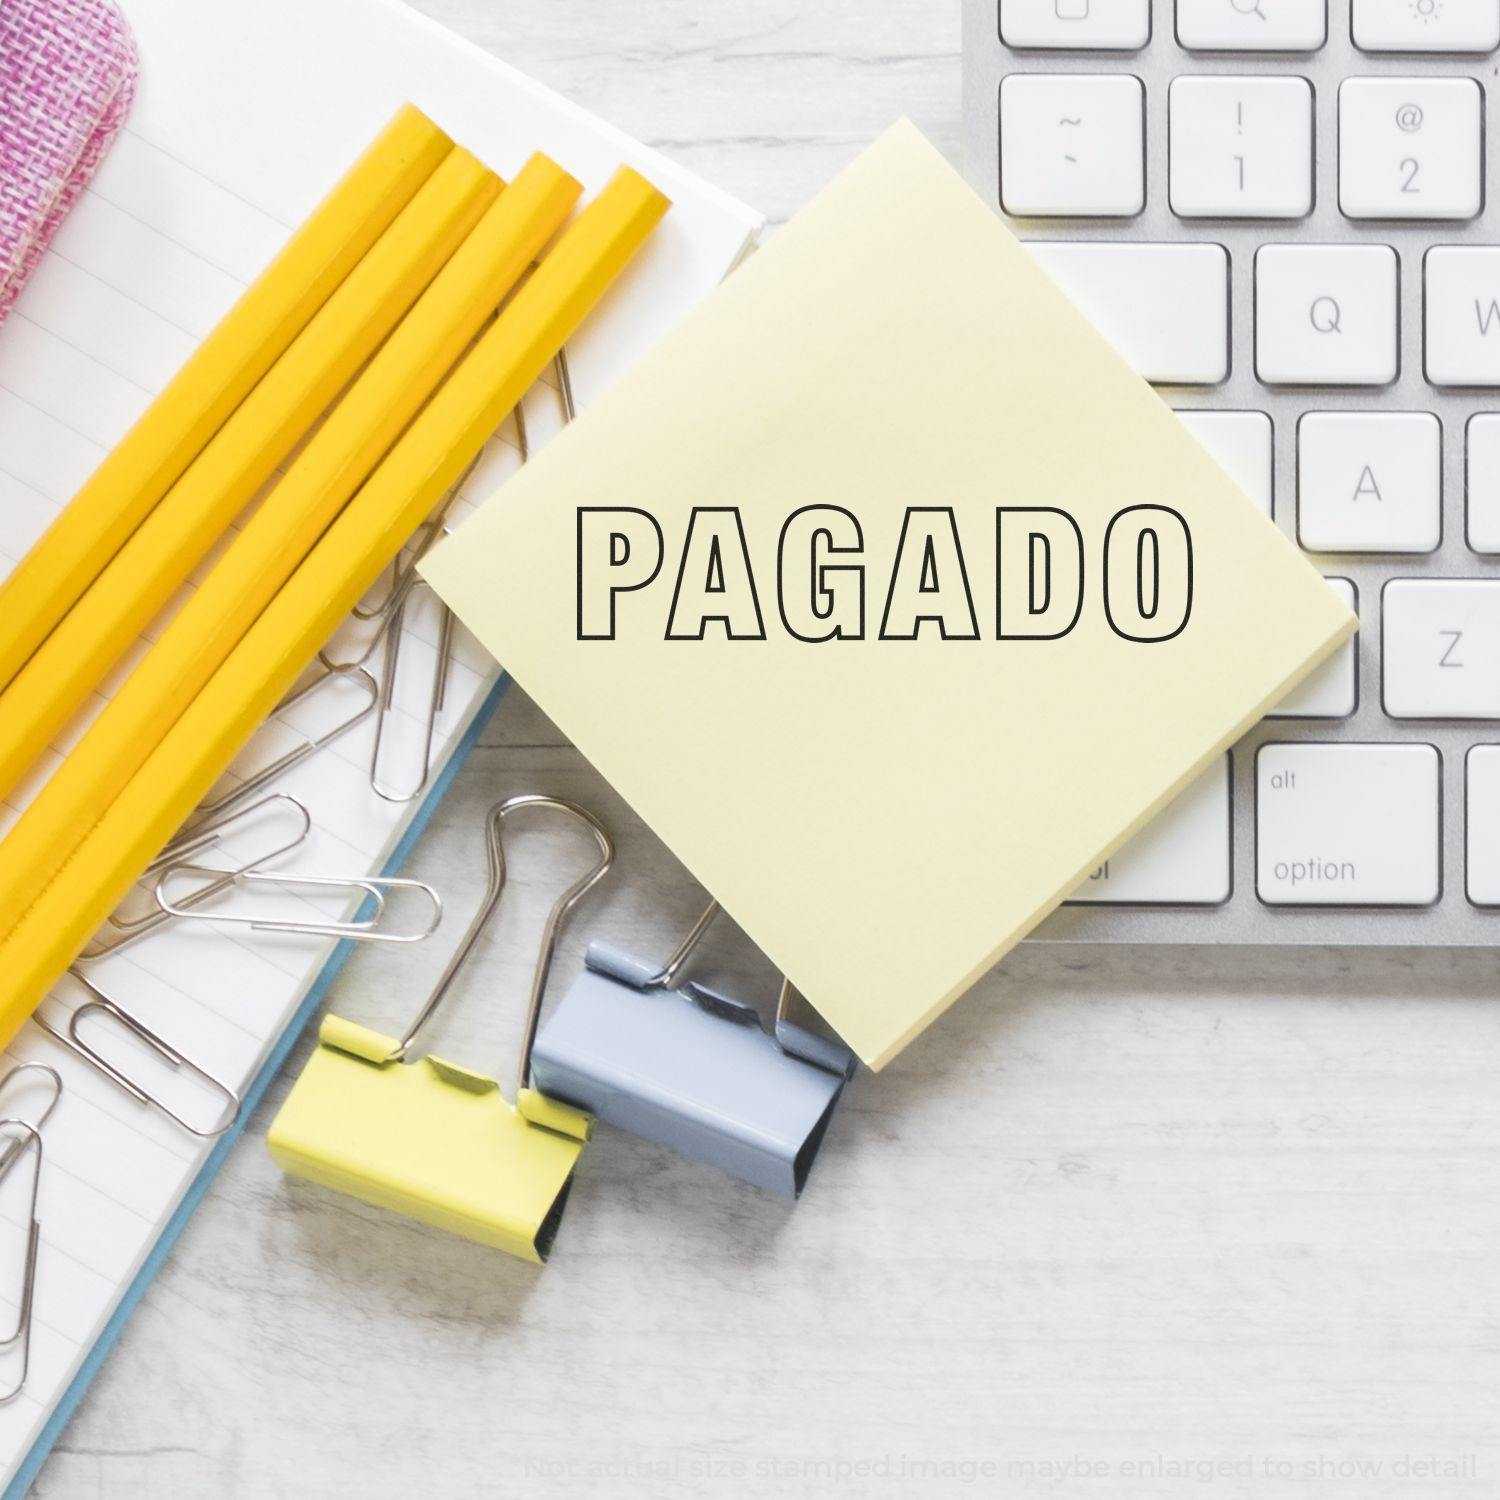 A stock office rubber stamp with a stamped image showing how the text "PAGADO" in a large outline font is displayed after stamping.